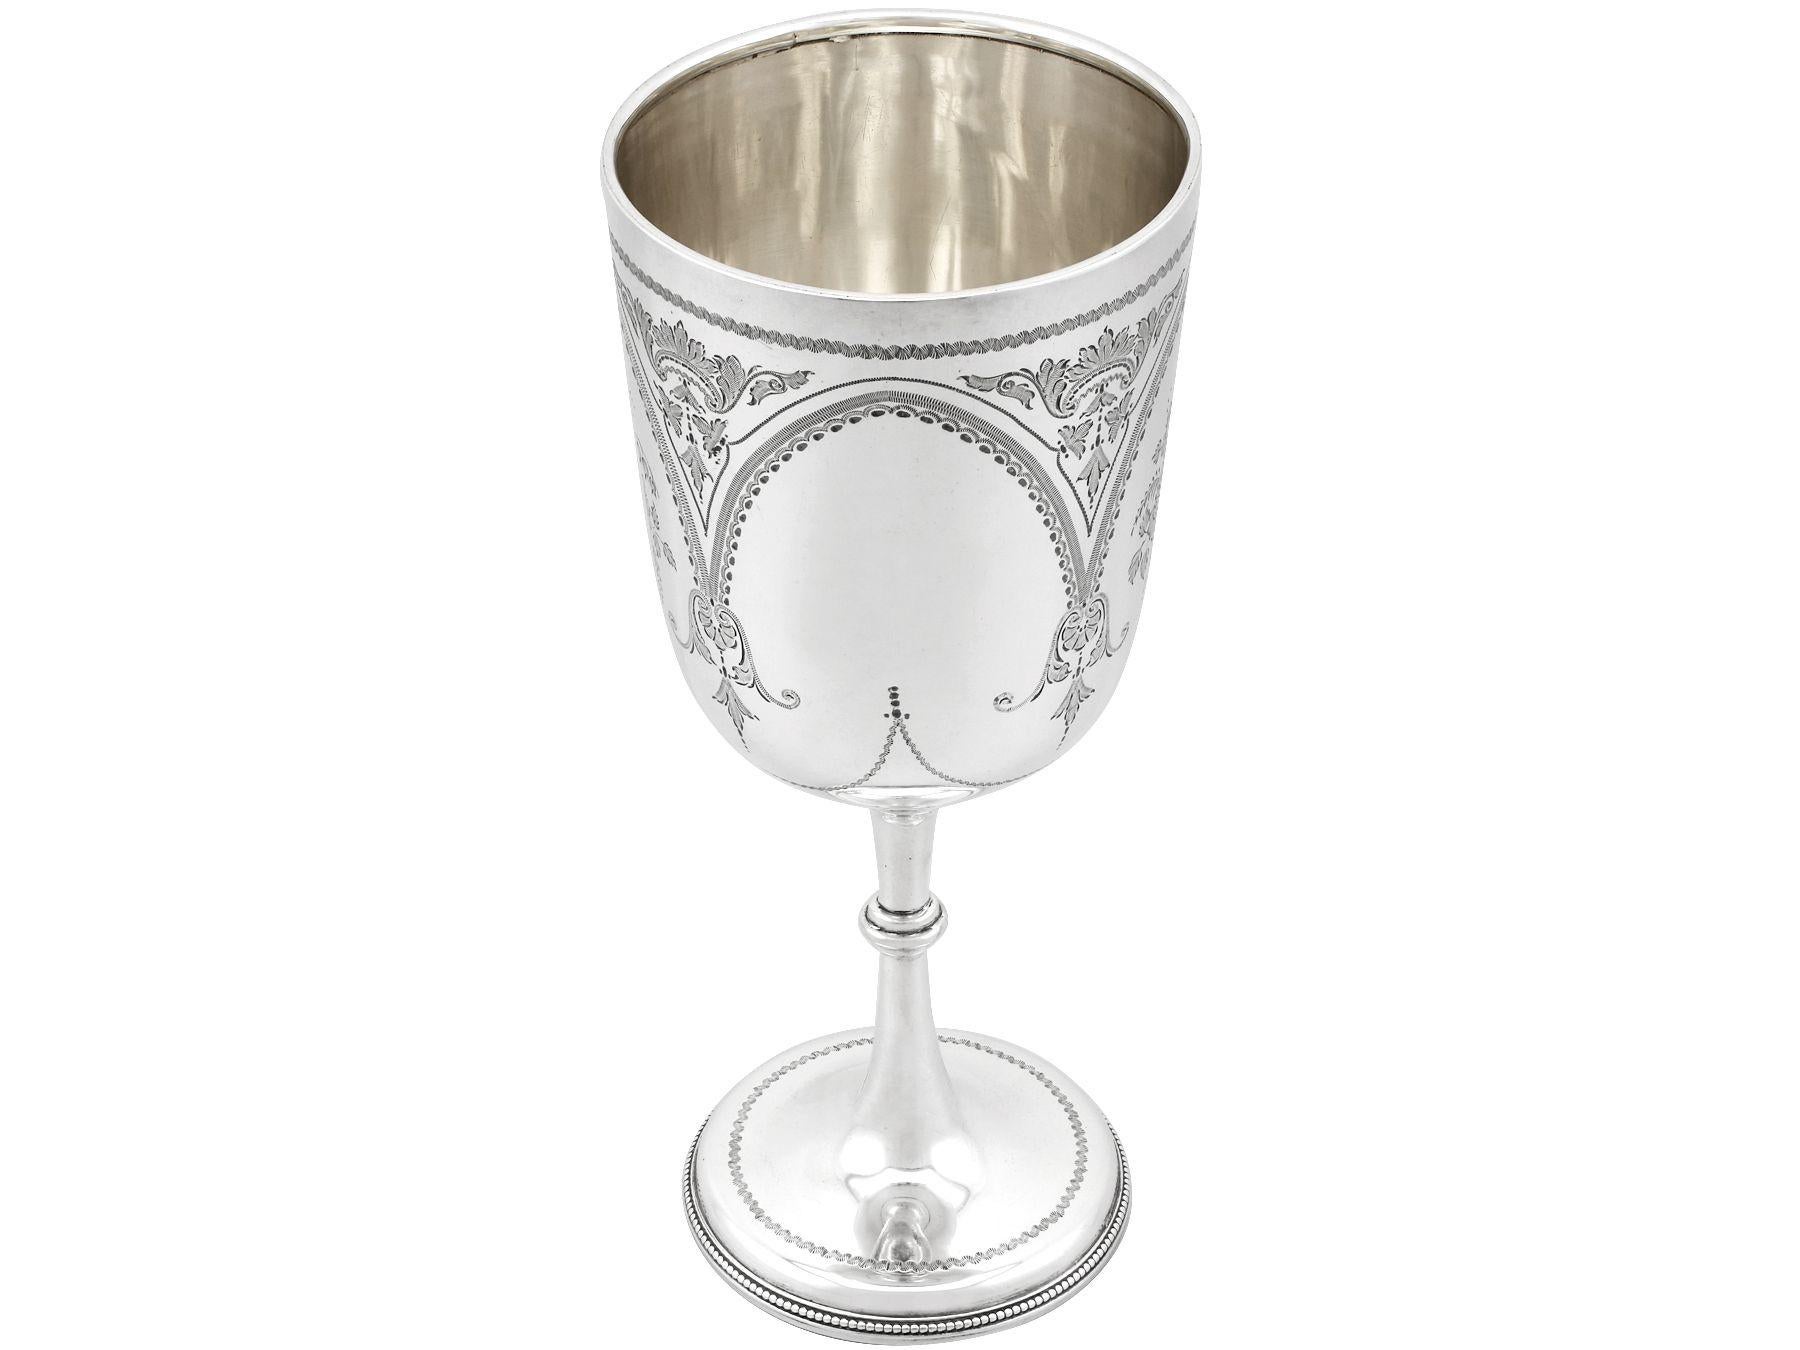 Antique Victorian 1895 Sterling Silver Goblet In Excellent Condition For Sale In Jesmond, Newcastle Upon Tyne